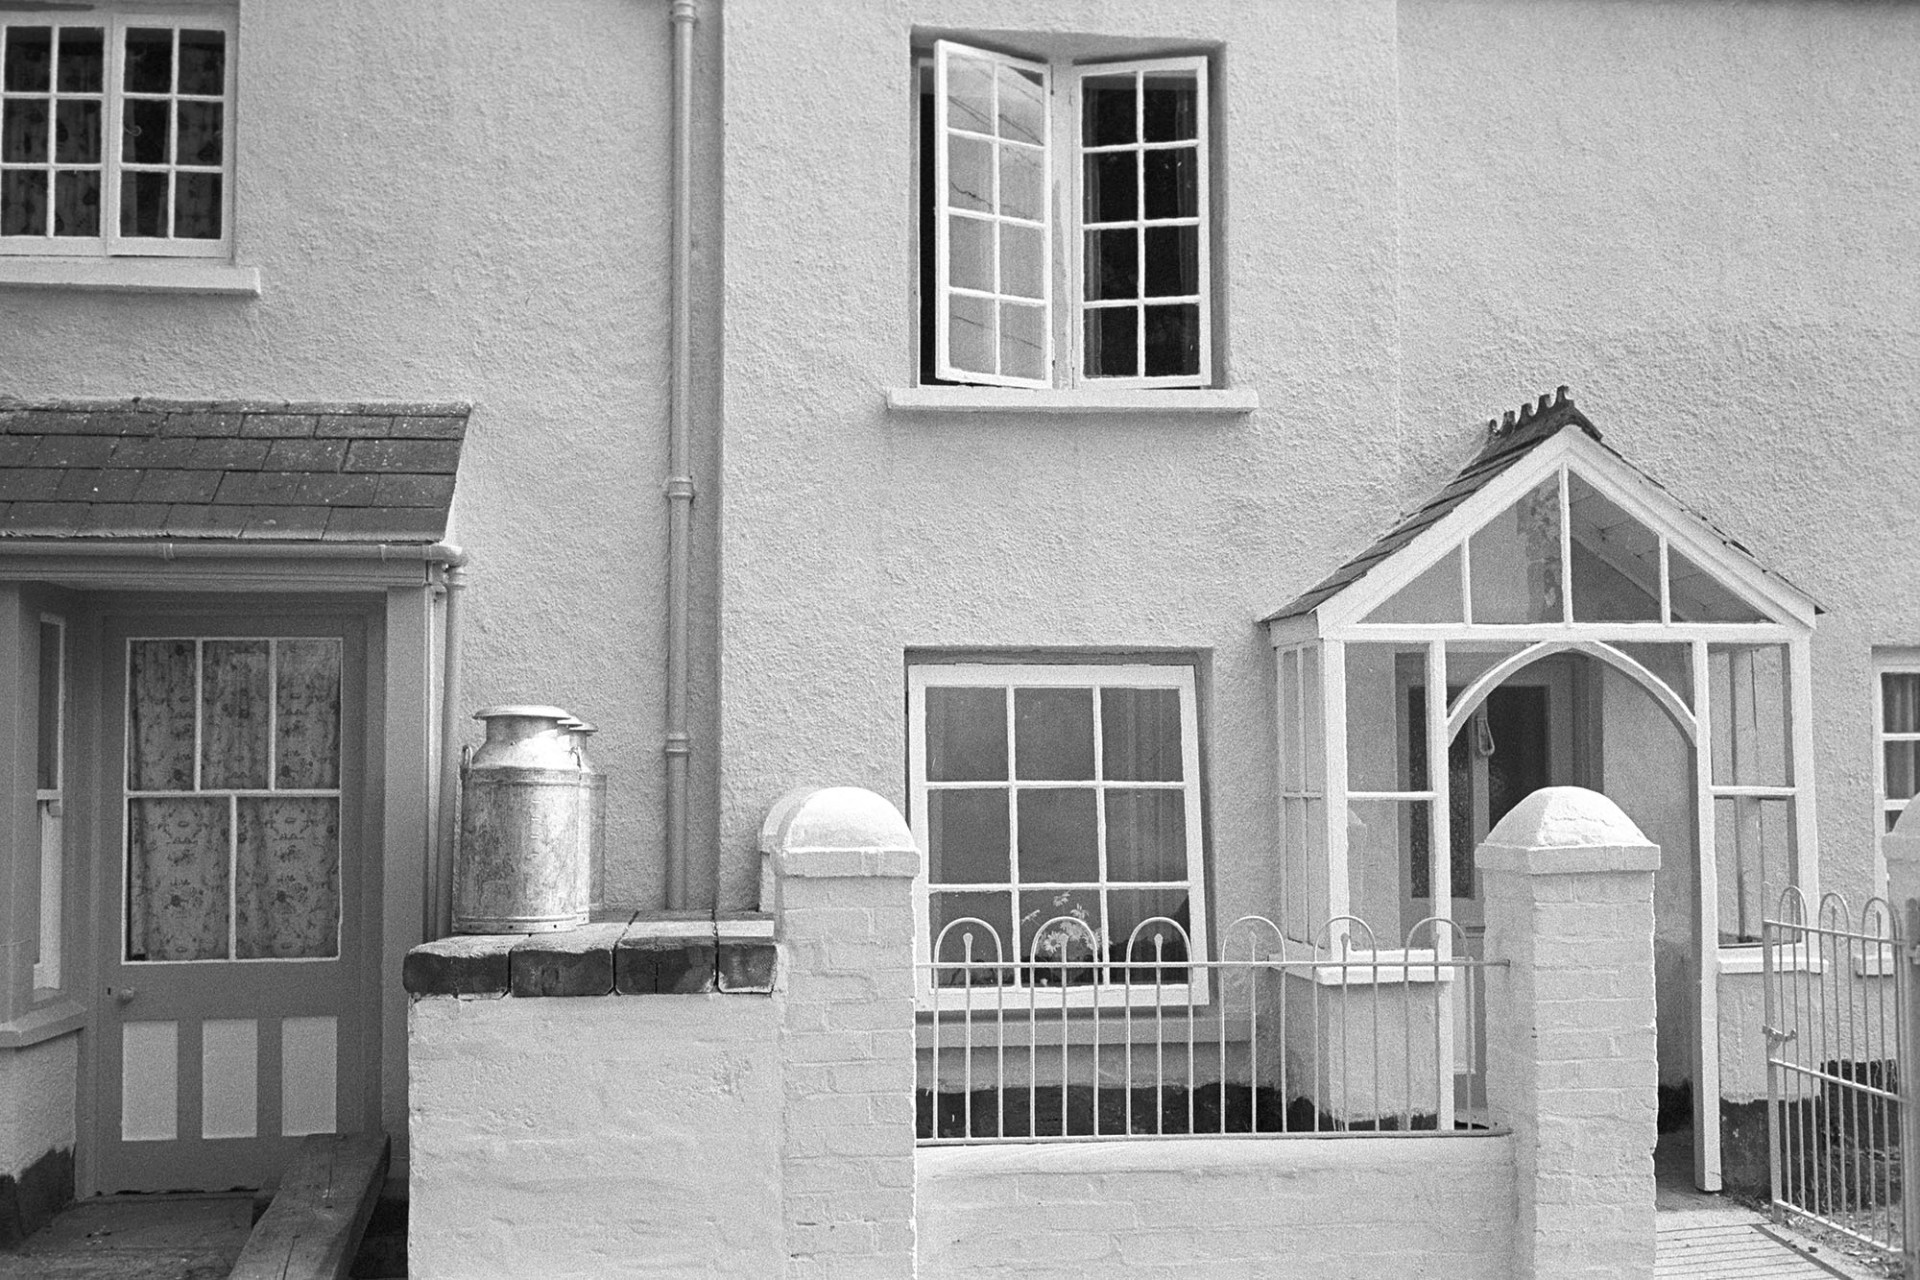 Front of house with milk stand and milk churns.
[Three milk churns on a milk stand outside a house in East Street, Sheepwash.]